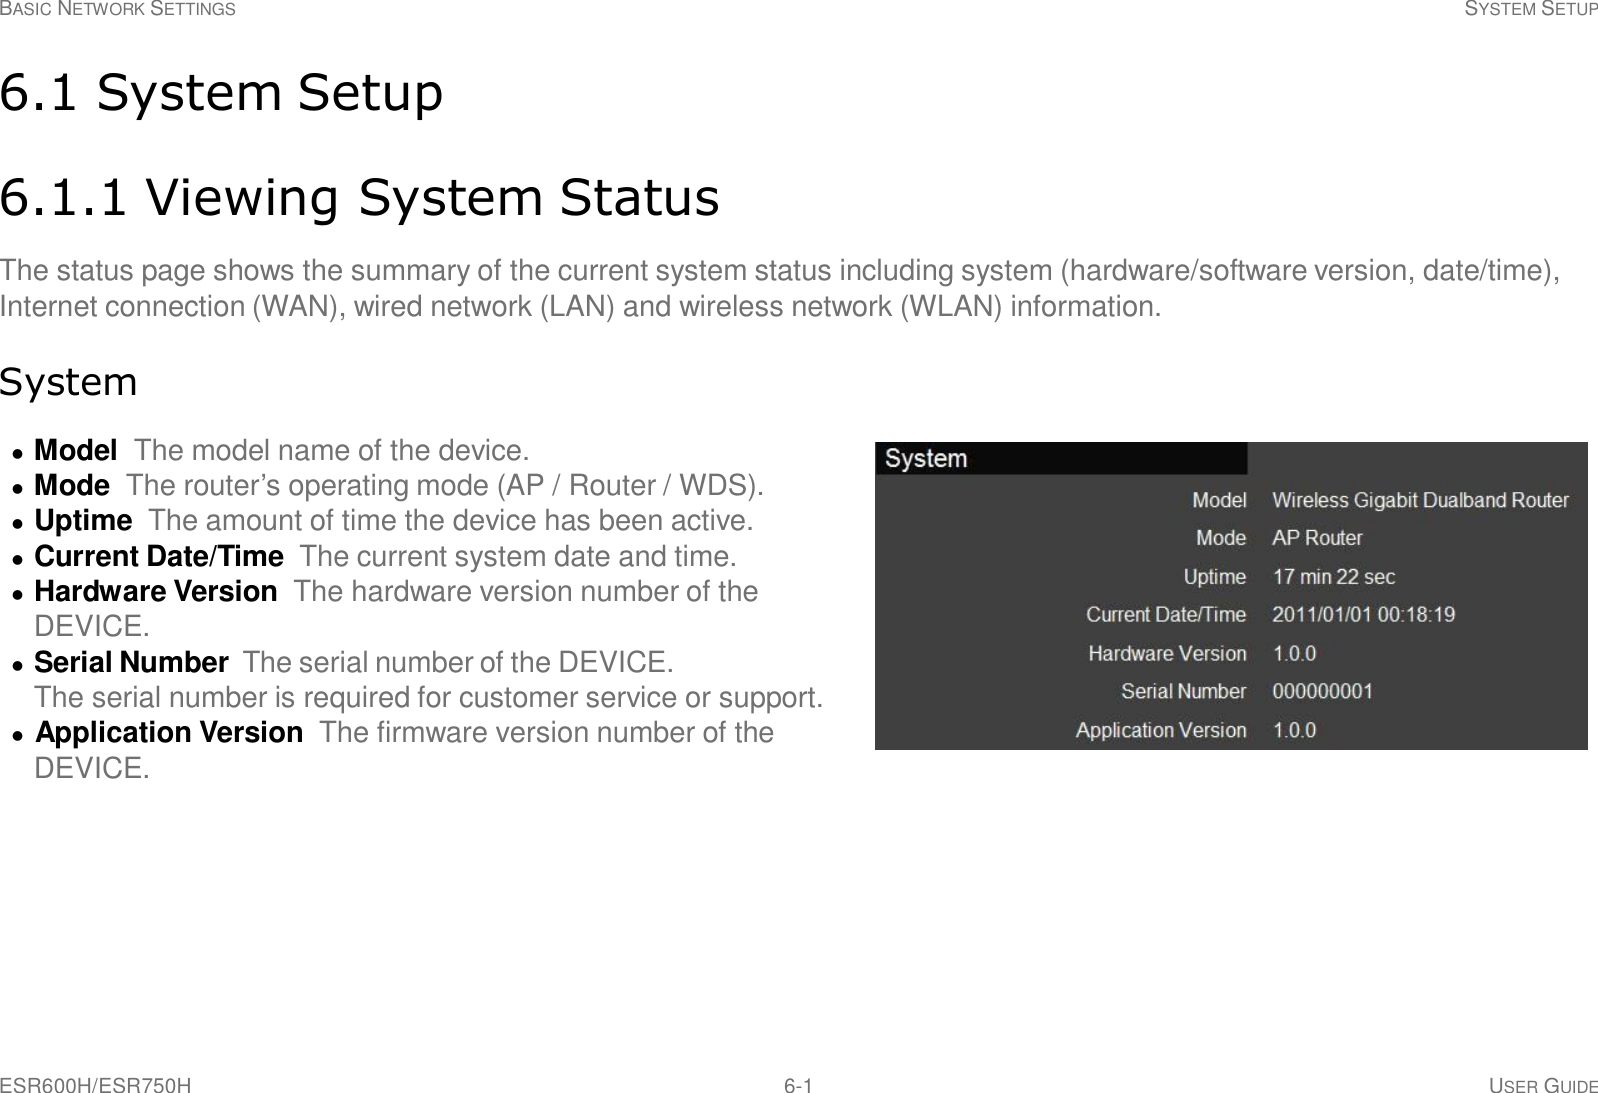 BASIC NETWORK SETTINGS SYSTEM SETUP ESR600H/ESR750H 6-1 USER GUIDE     6.1 System Setup   6.1.1 Viewing System Status  The status page shows the summary of the current system status including system (hardware/software version, date/time), Internet connection (WAN), wired network (LAN) and wireless network (WLAN) information.   System    Model  The model name of the device.   Mode  The router’s operating mode (AP / Router / WDS).   Uptime The amount of time the device has been active.   Current Date/Time The current system date and time.   Hardware Version  The hardware version number of the DEVICE.   Serial Number The serial number of the DEVICE. The serial number is required for customer service or support.    Application Version  The firmware version number of the DEVICE. 